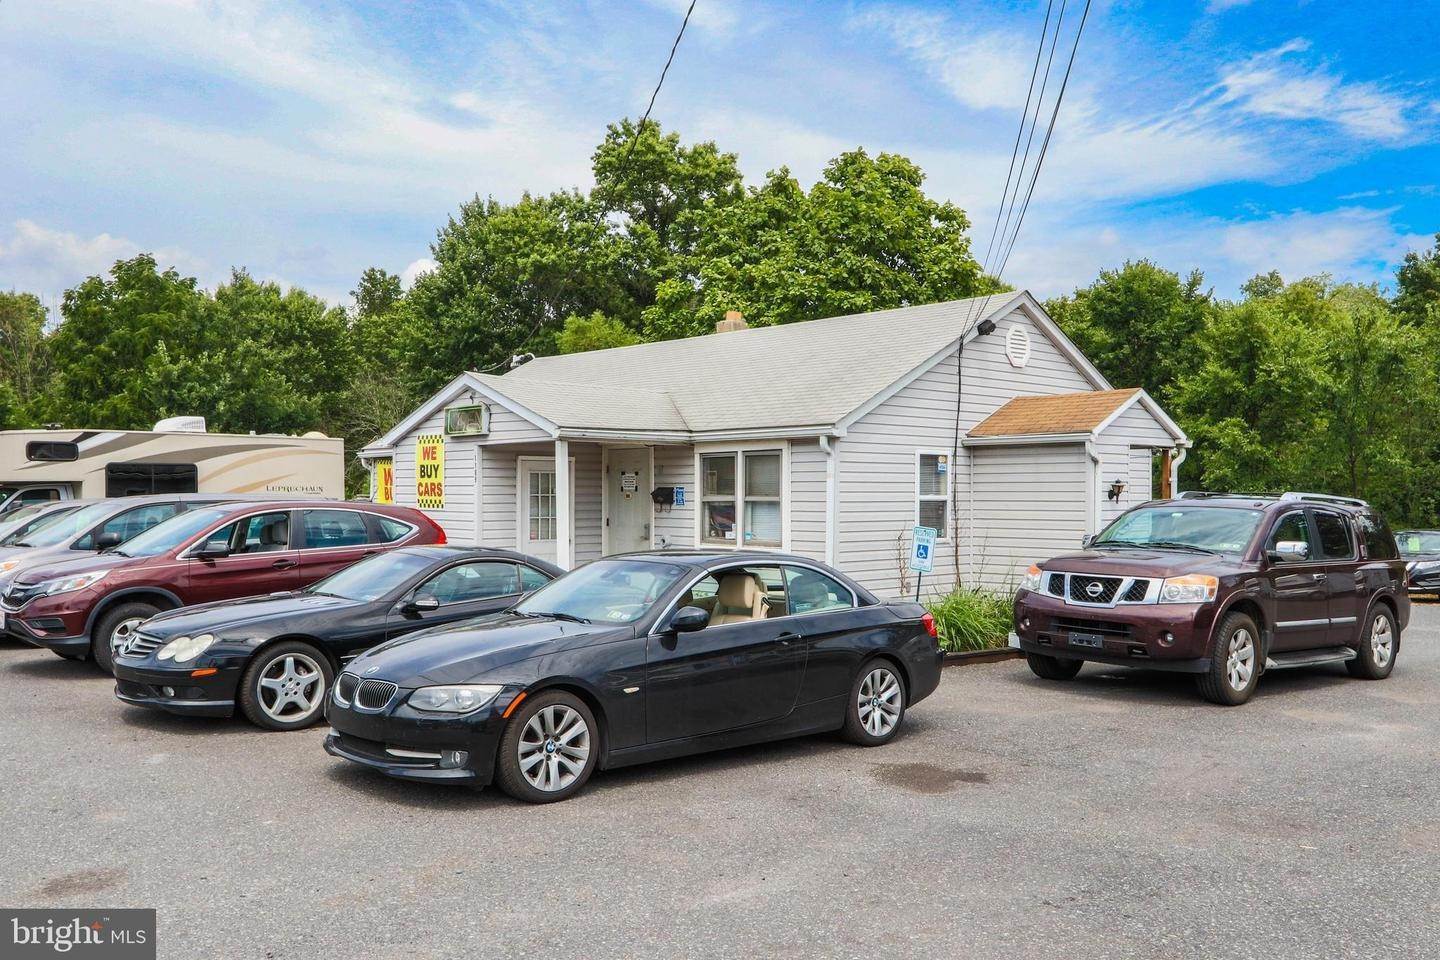 2. Commercial for Sale at 1189 N WEST END BLVD Quakertown, Pennsylvania 18951 United States